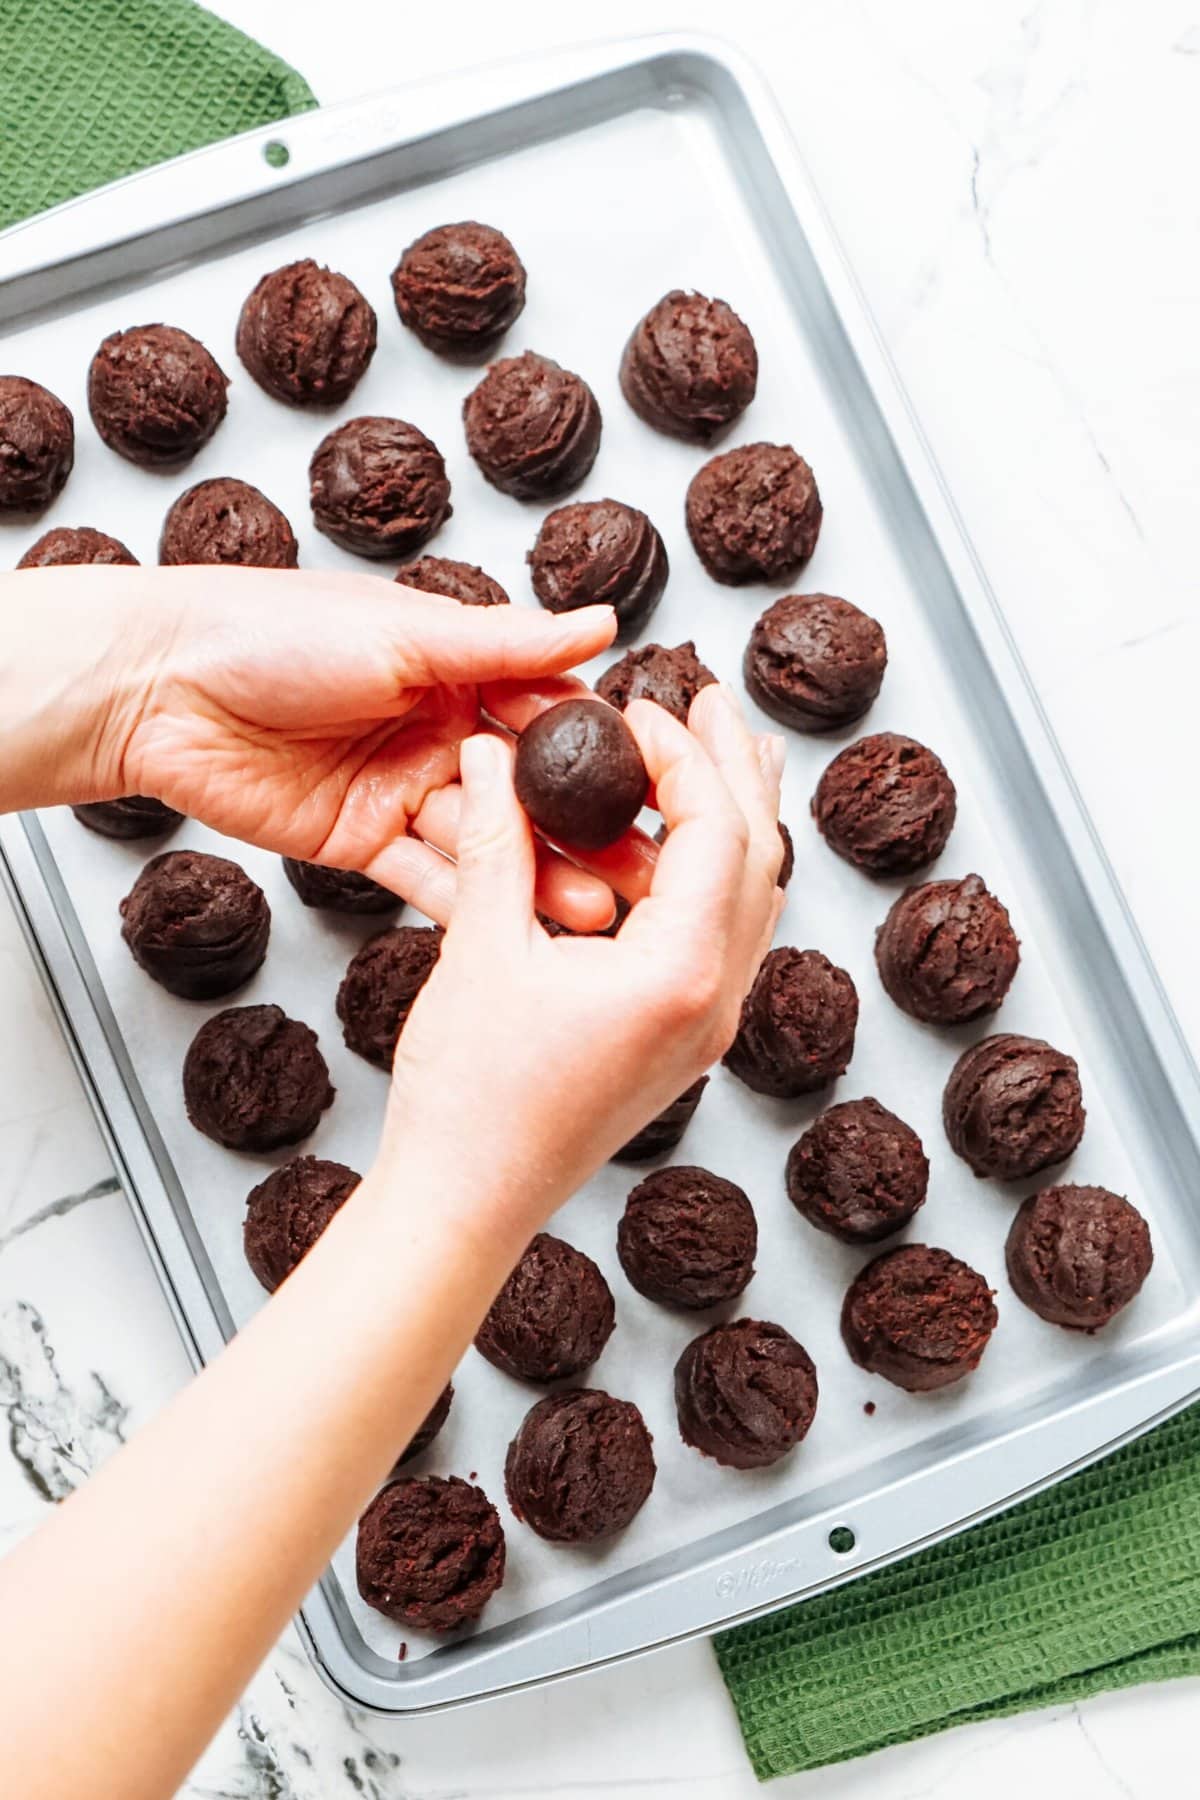 A person putting chocolate balls on a baking sheet.